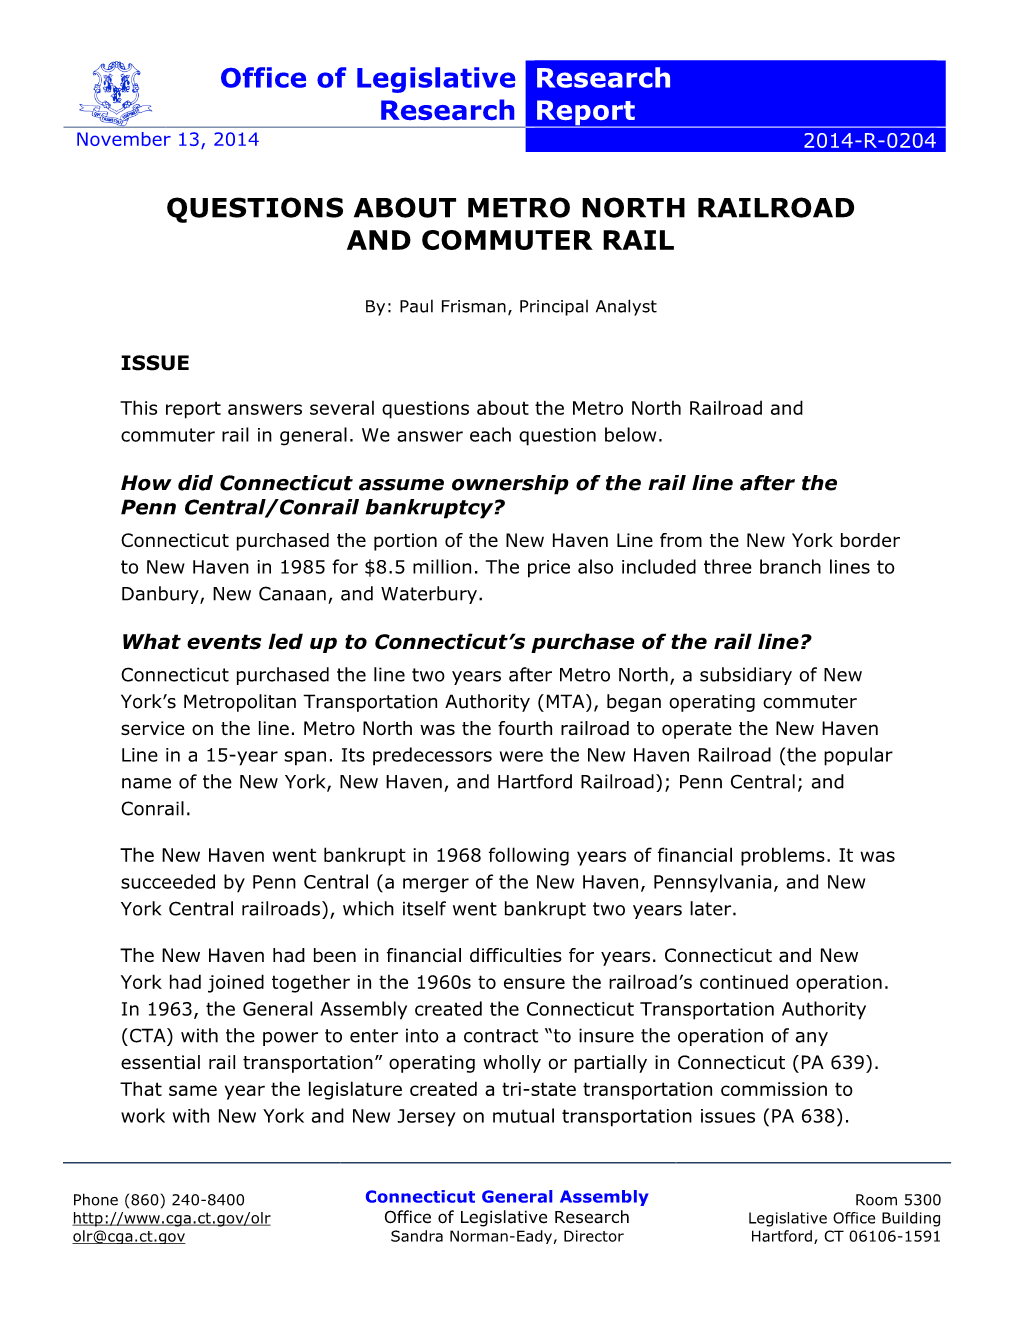 Questions About Metro North Railroad and Commuter Rail